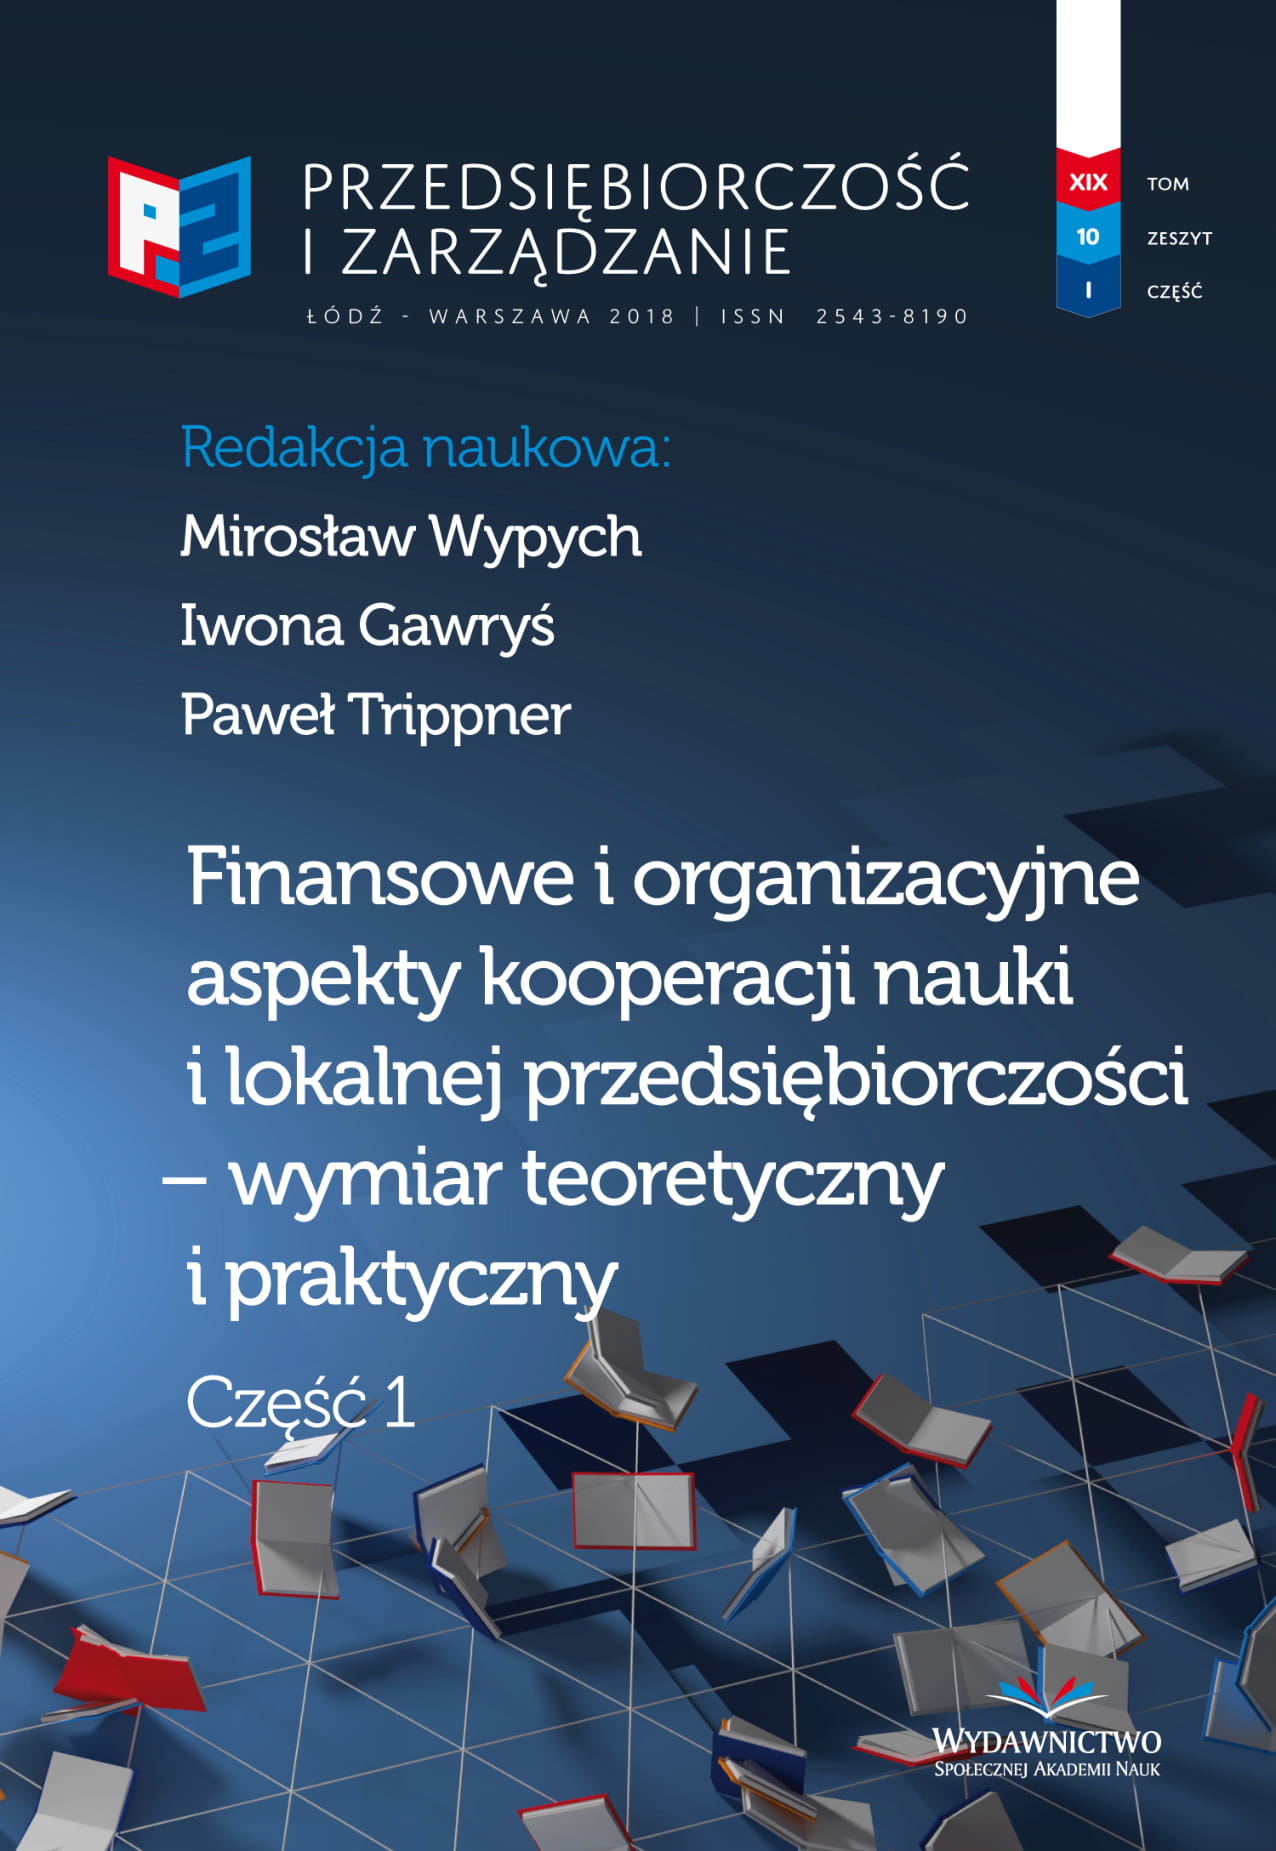 Active Labour Market Policy For Young People NEET
Exemplified by the Podlaskie Voivodship Cover Image